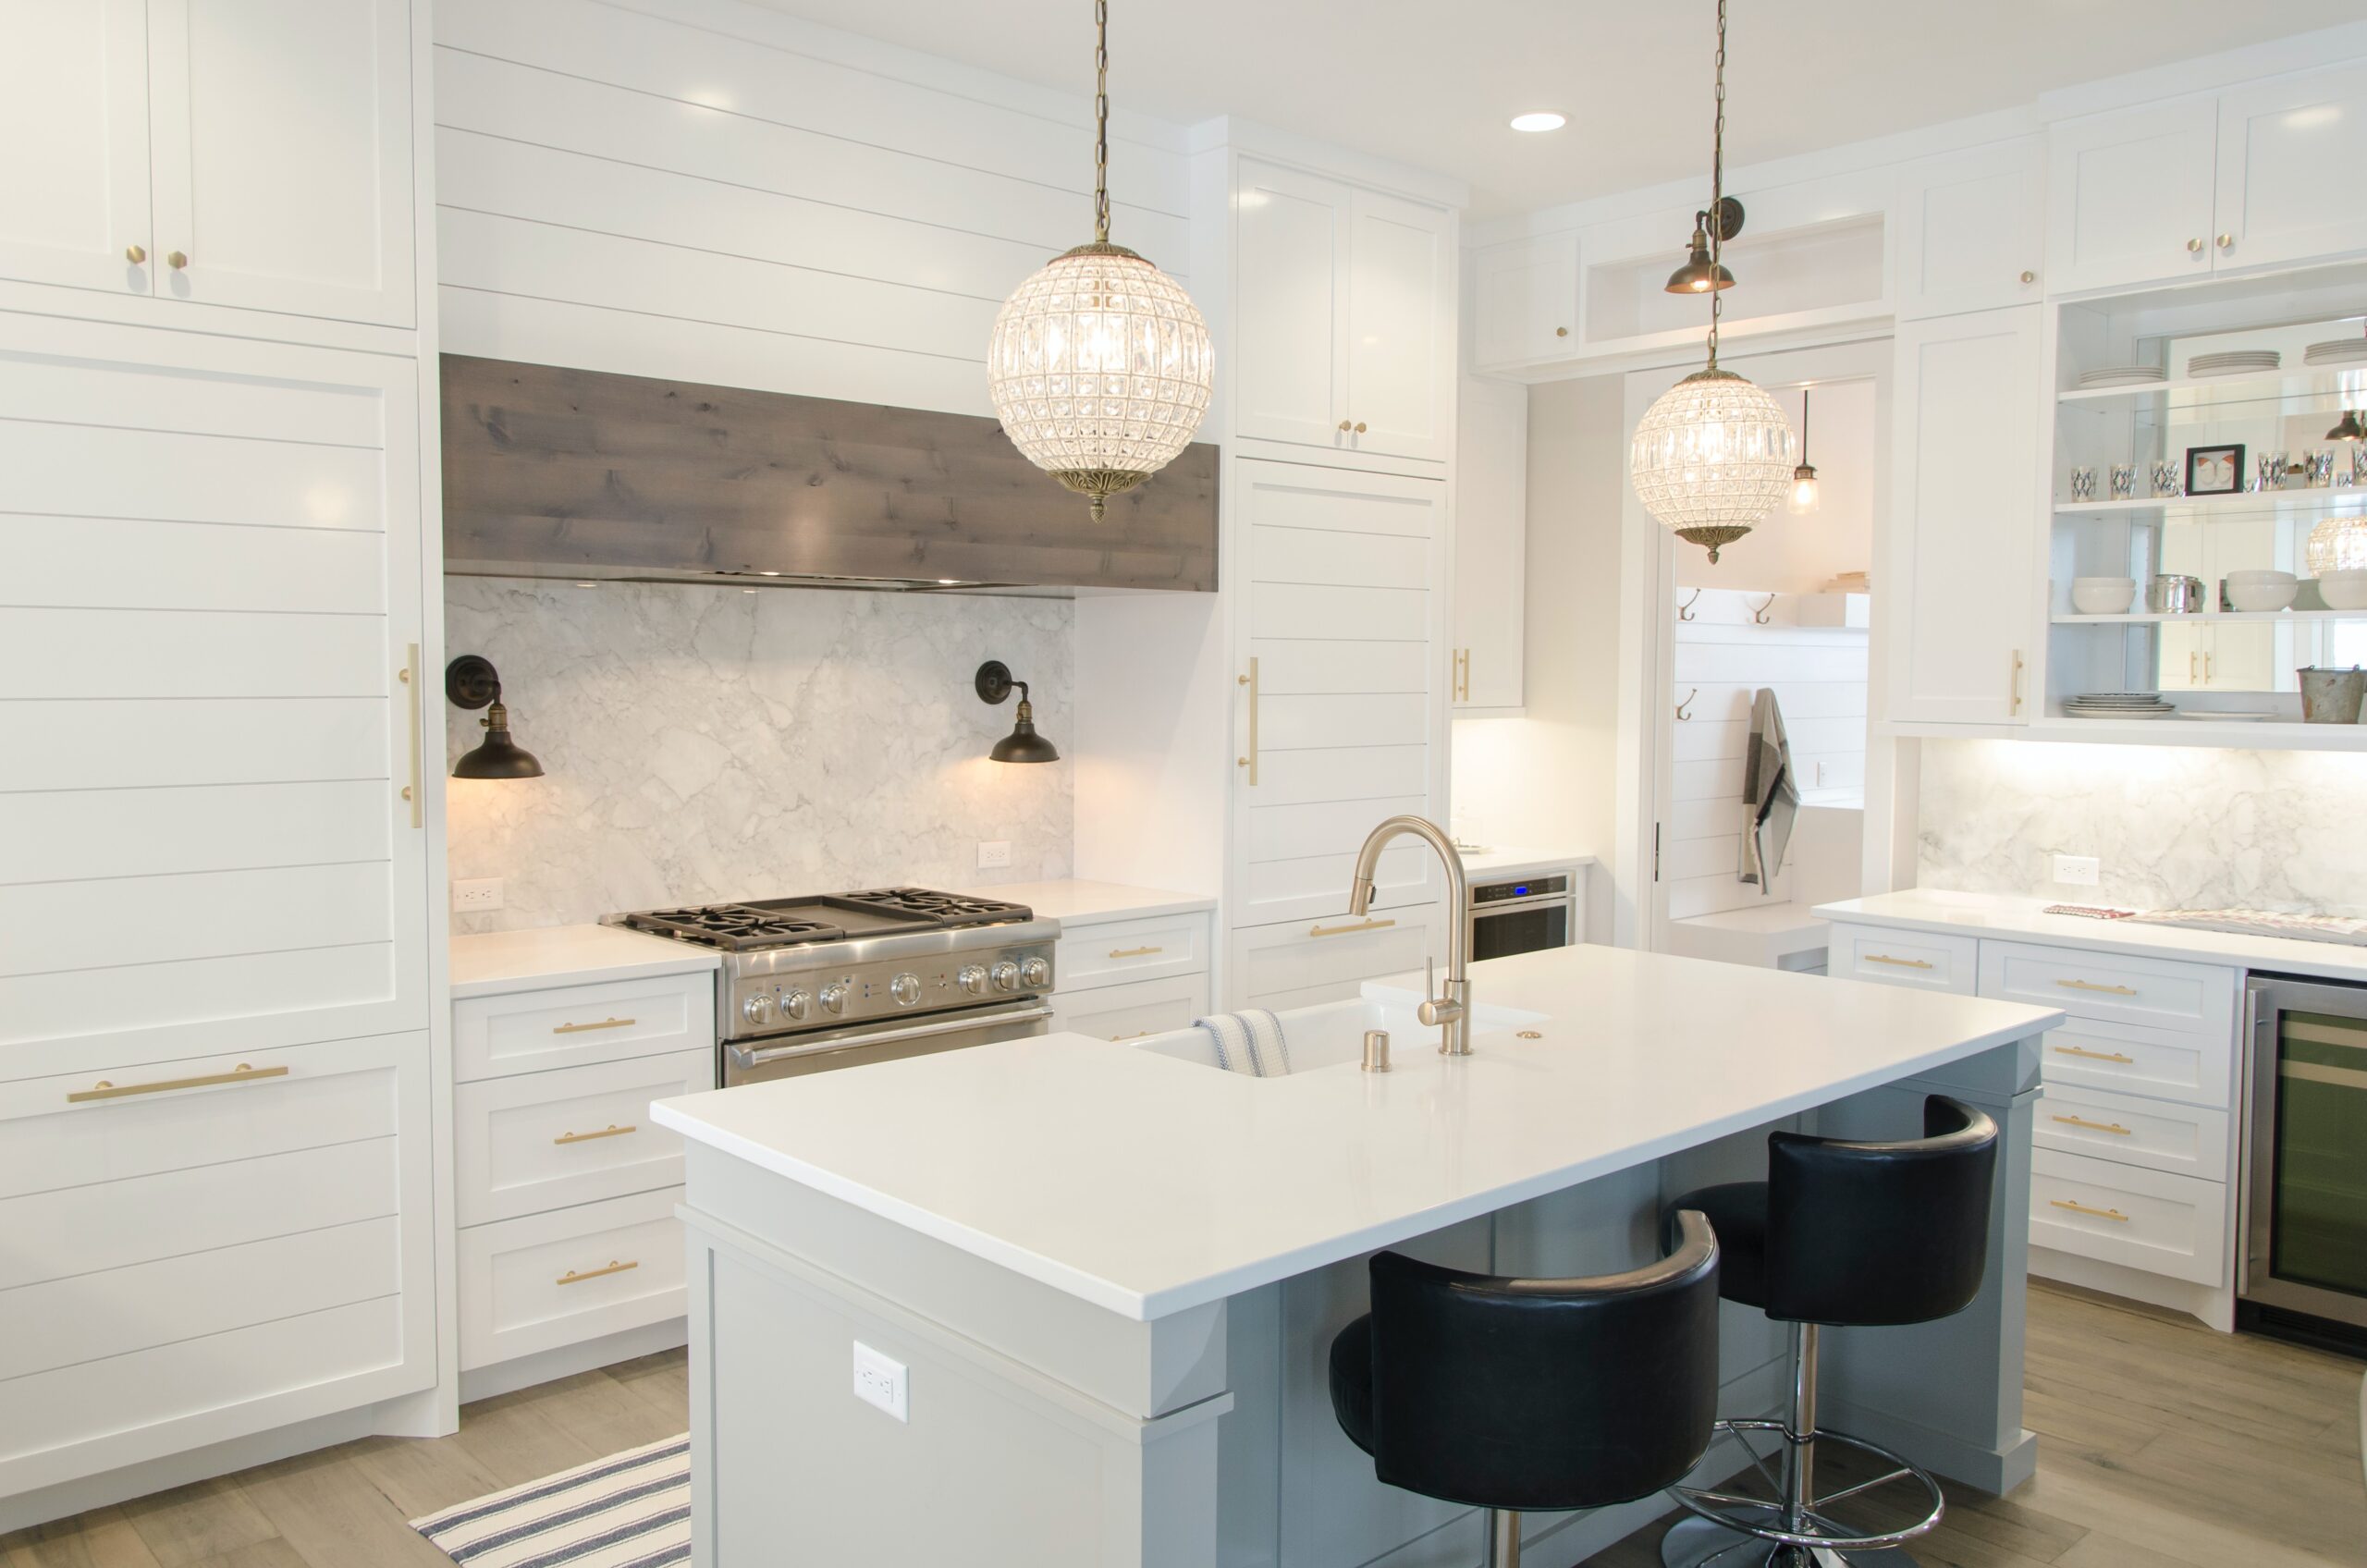 Kitchen Lighting: Buying Guide – Illuminate Your Culinary Space Like a Pro!